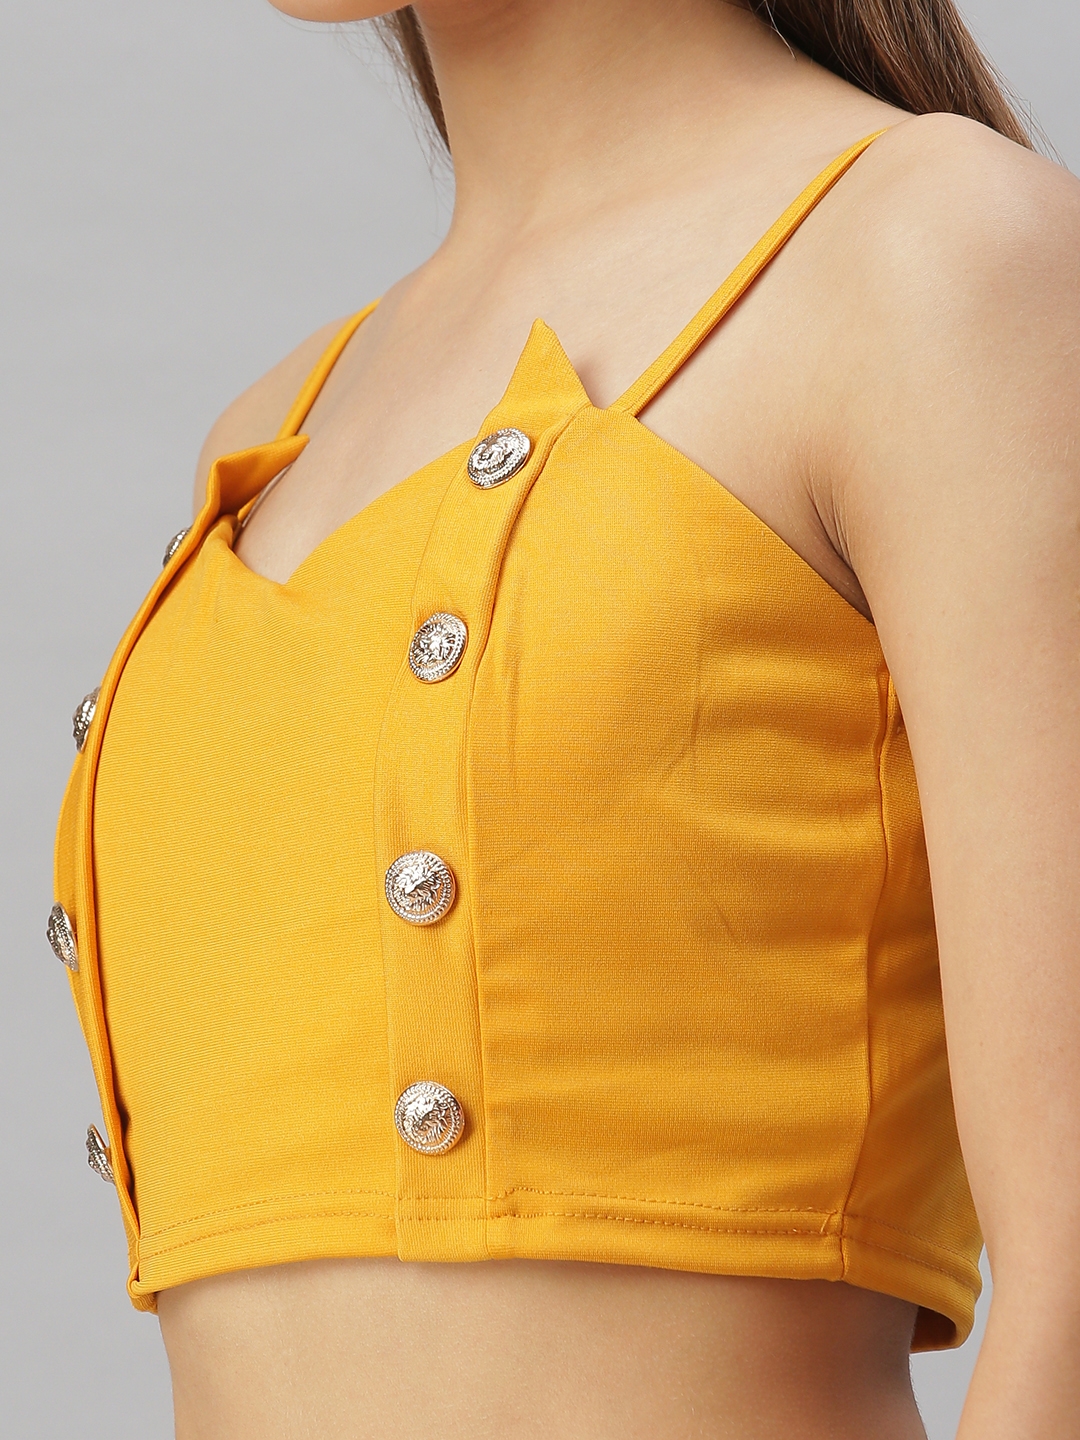 Women's Yellow Polyester Solid Tops